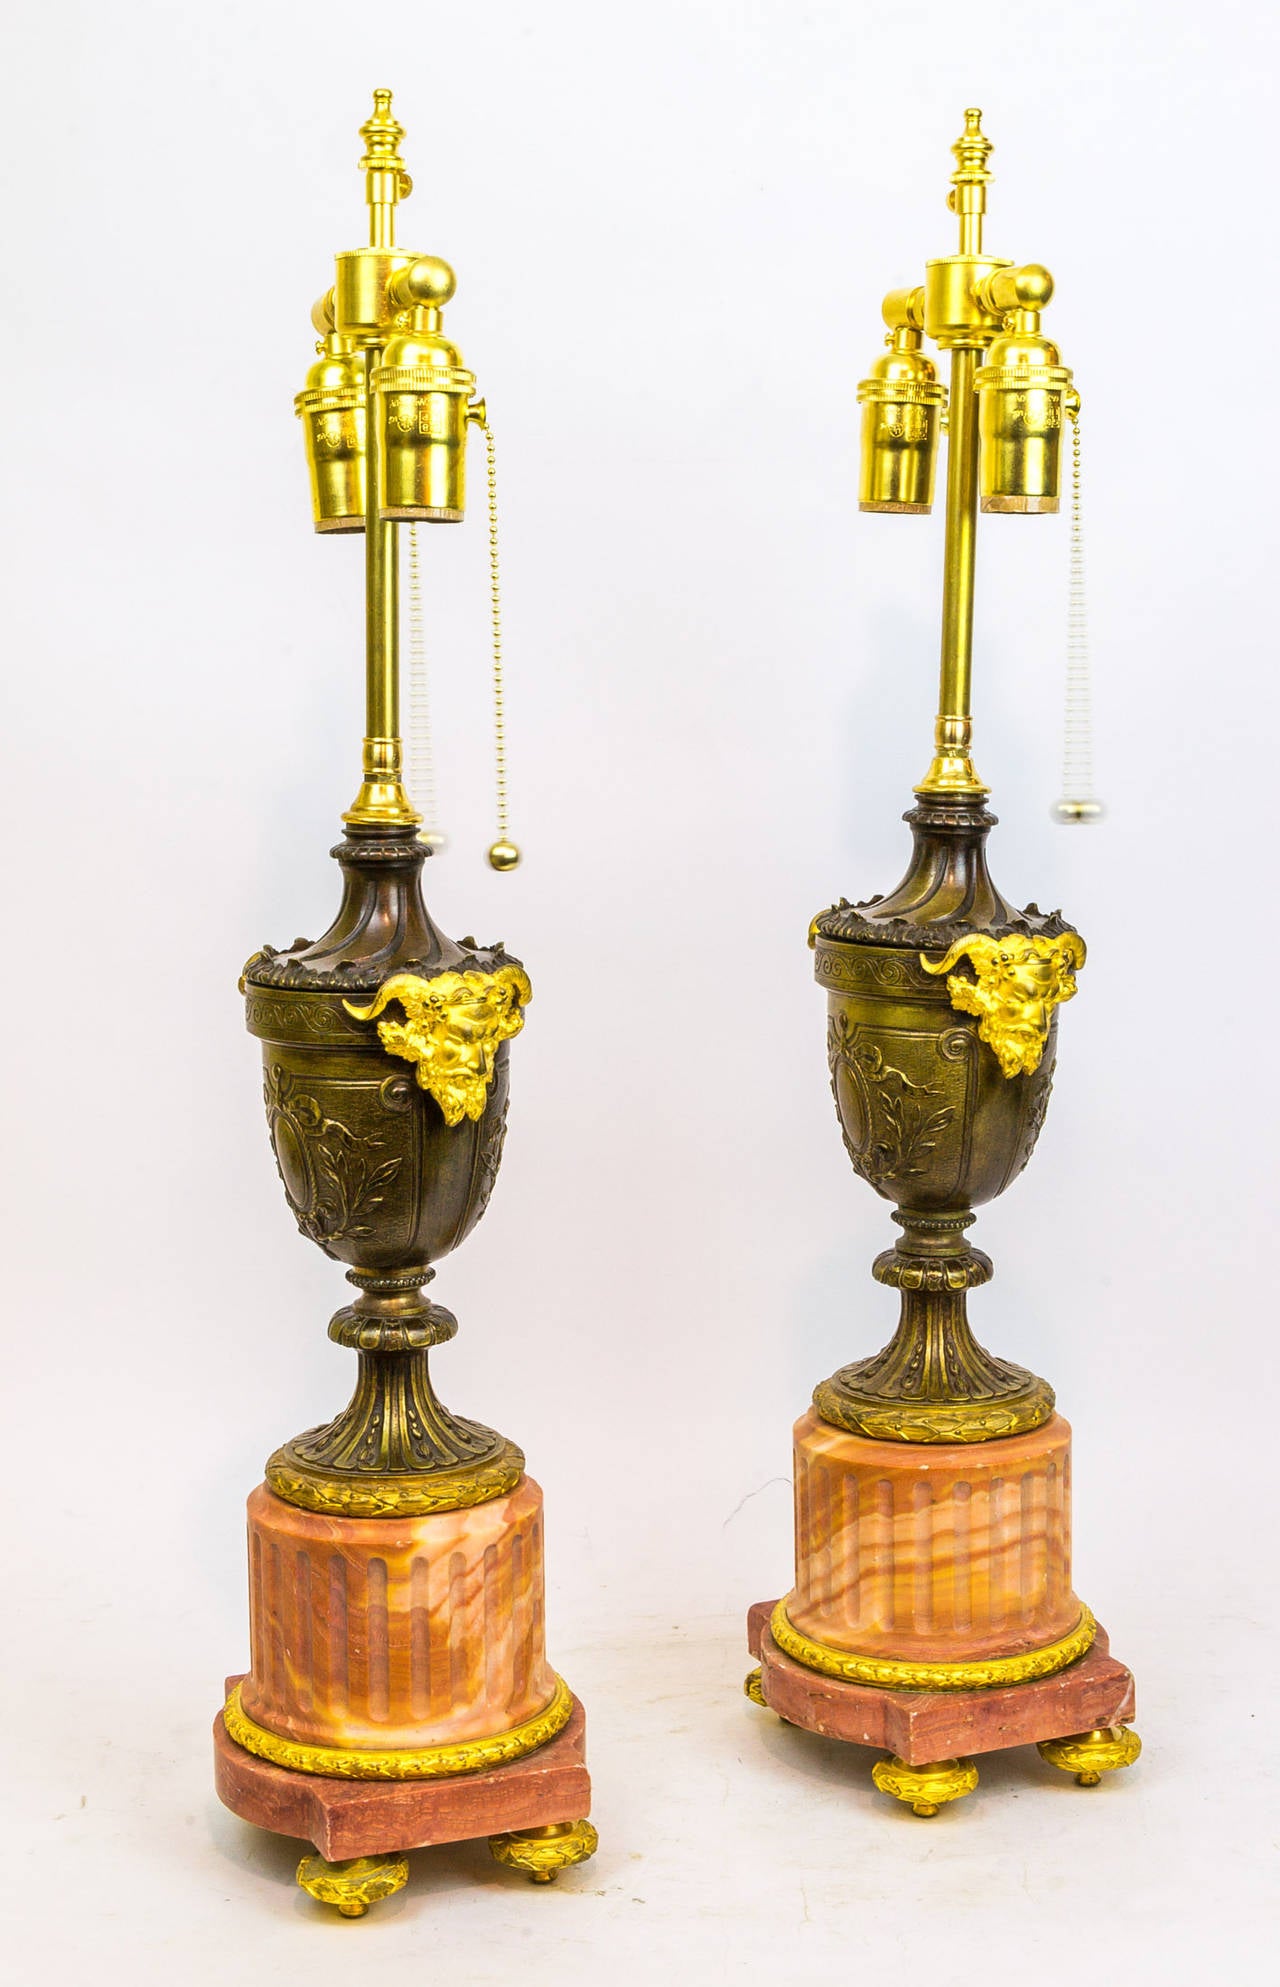 Louis XVI Style Pair of Marble and Bronze Lamps with Mask Face Handles
Stock Number: LL29